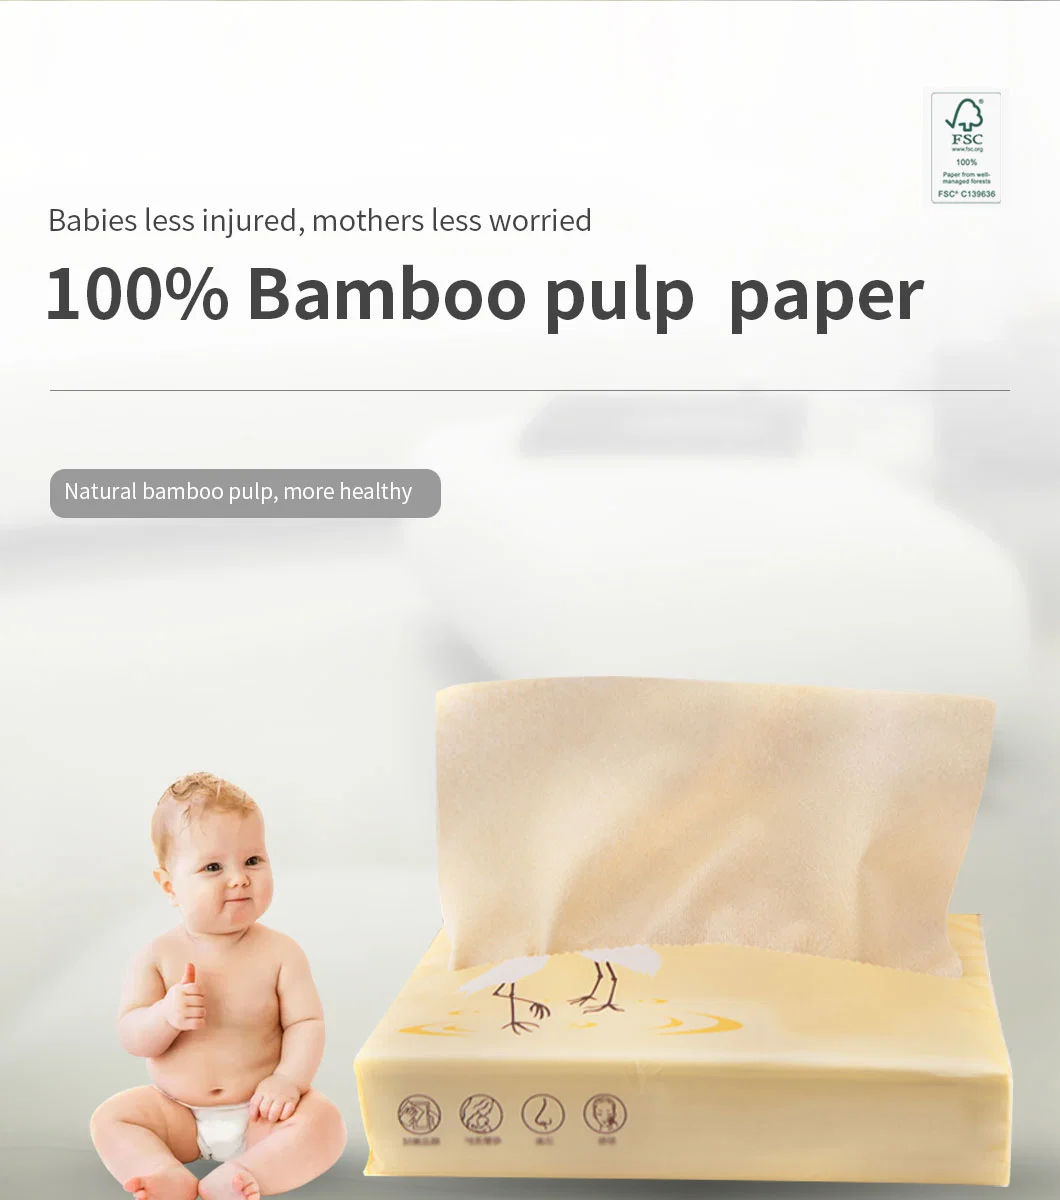 Baby Care Bamboo Facial Paper/Towel, Super Safe Biodegradable Bath Tissue/Towel, Eco Friendly Ultra Soft 1 Ply Sheets, 120 Counts Special Formula OEM Welcome